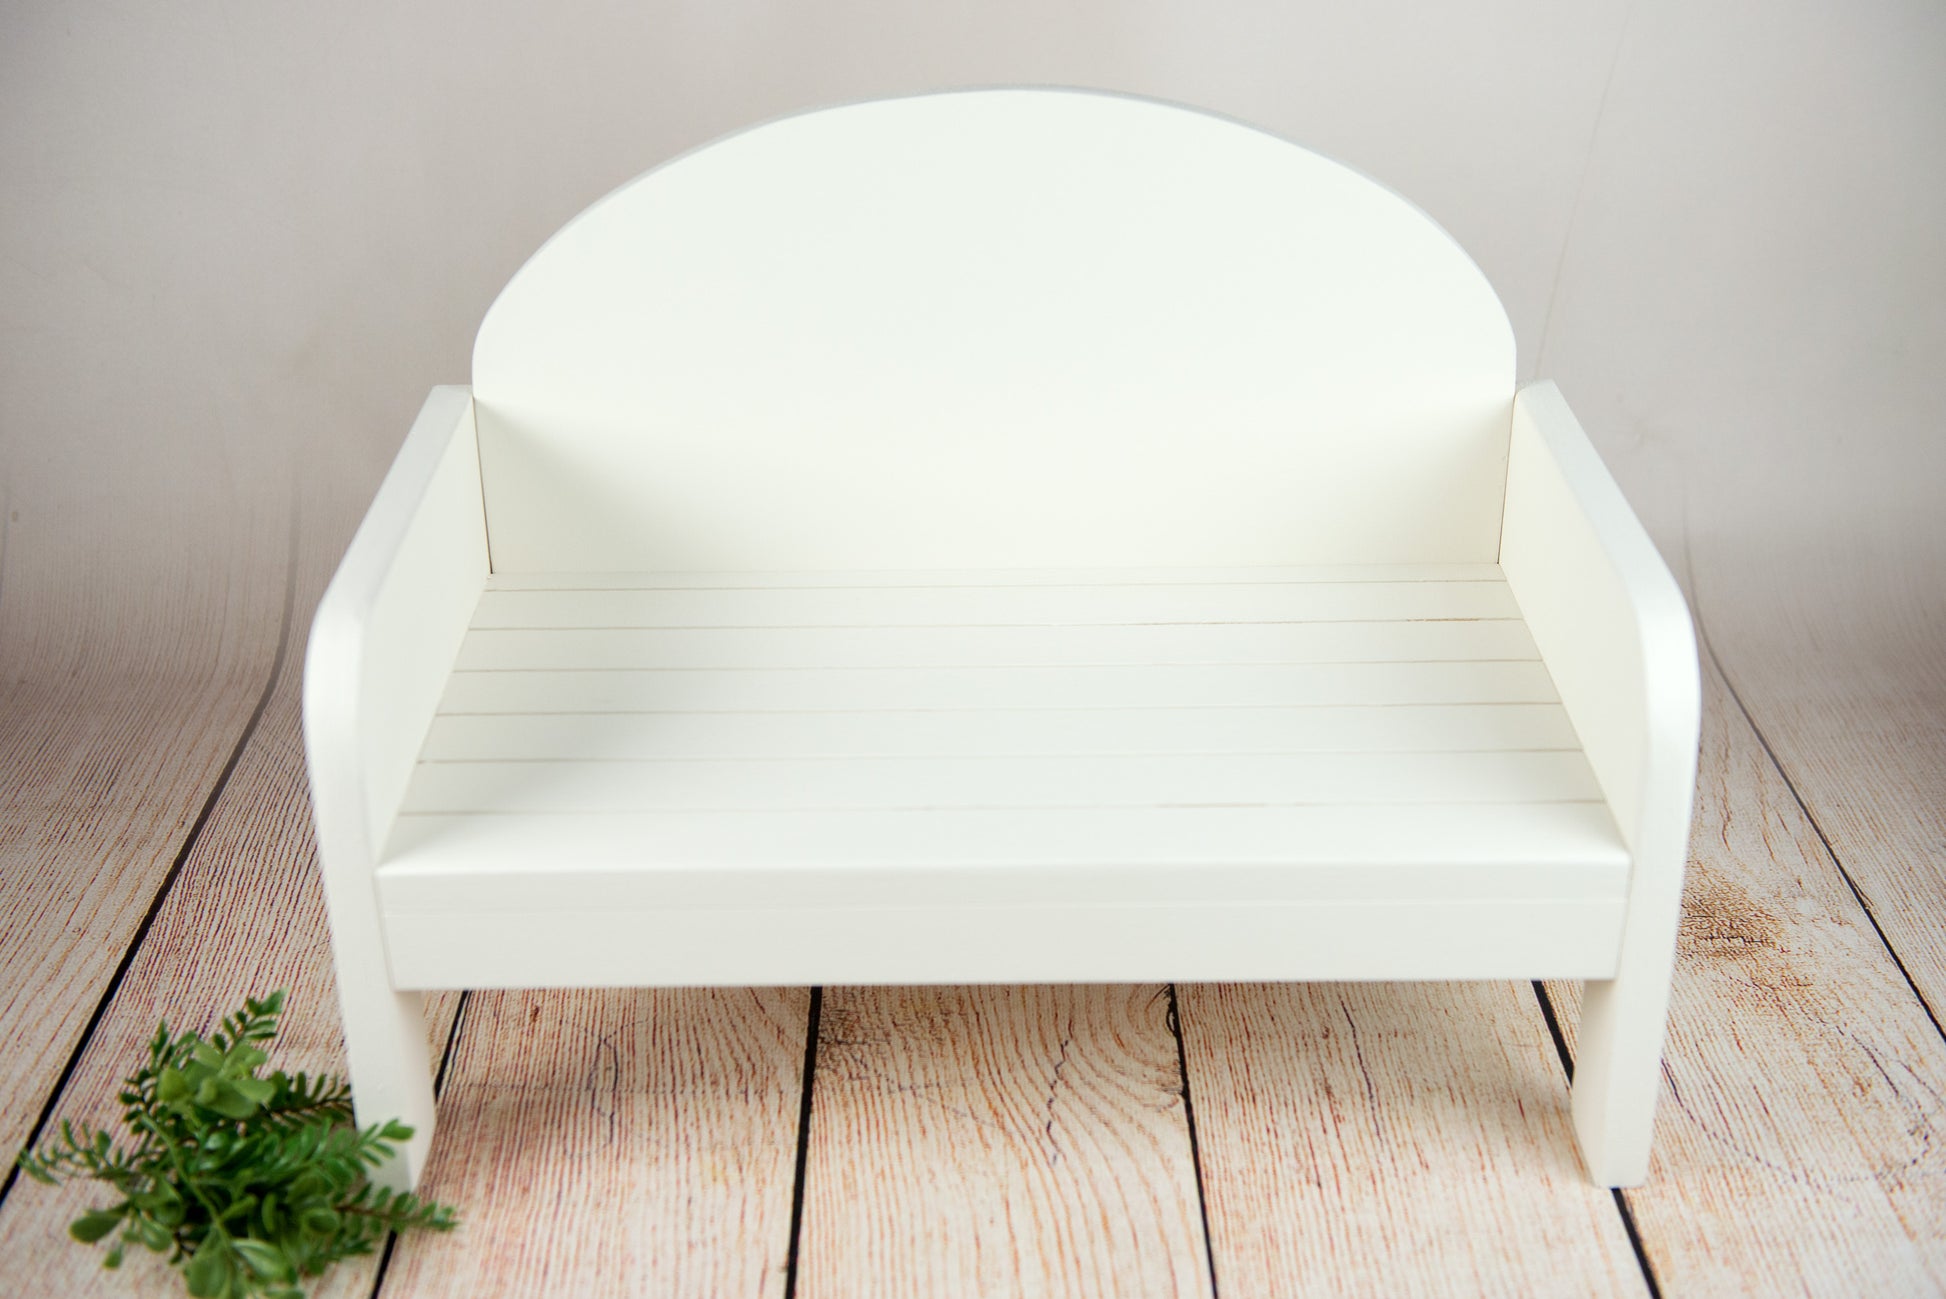 Handmade white rustic wooden bench for newborn photography, cozy curve design, ideal for baby photographers